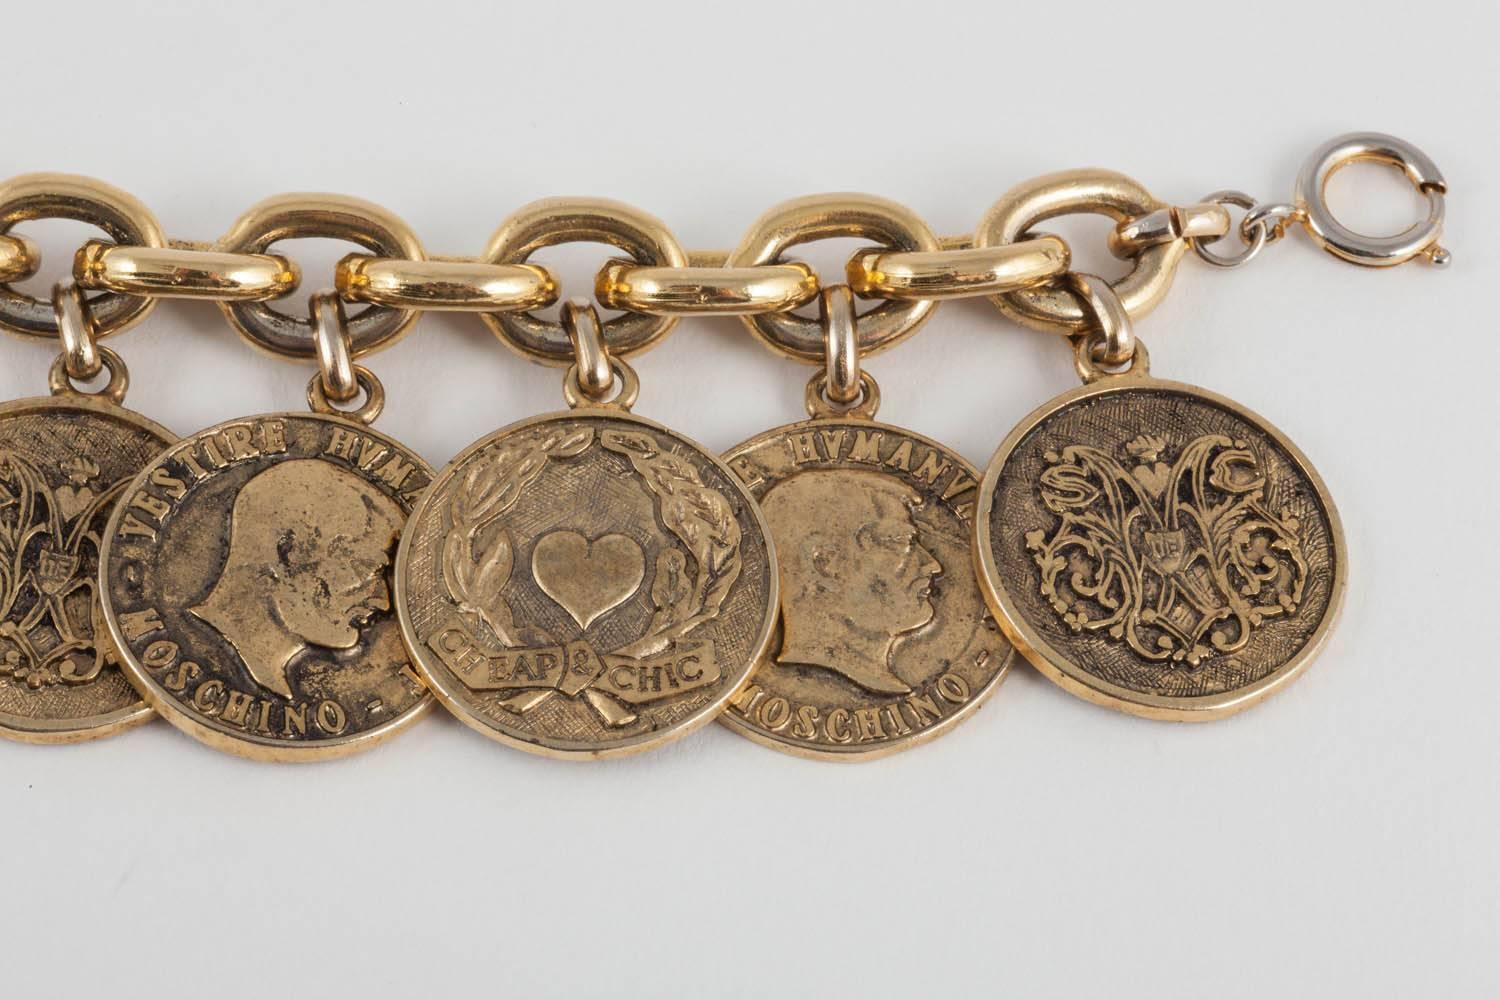 Franco Moschino introduced his Cheap and Chic range in 1988 and this was one of the early pieces for that line. Hung from a shiny thick gilt chain, there are wonderfully chunky and bold antiqued coins with faces, cowboy hats and faux coats of arms